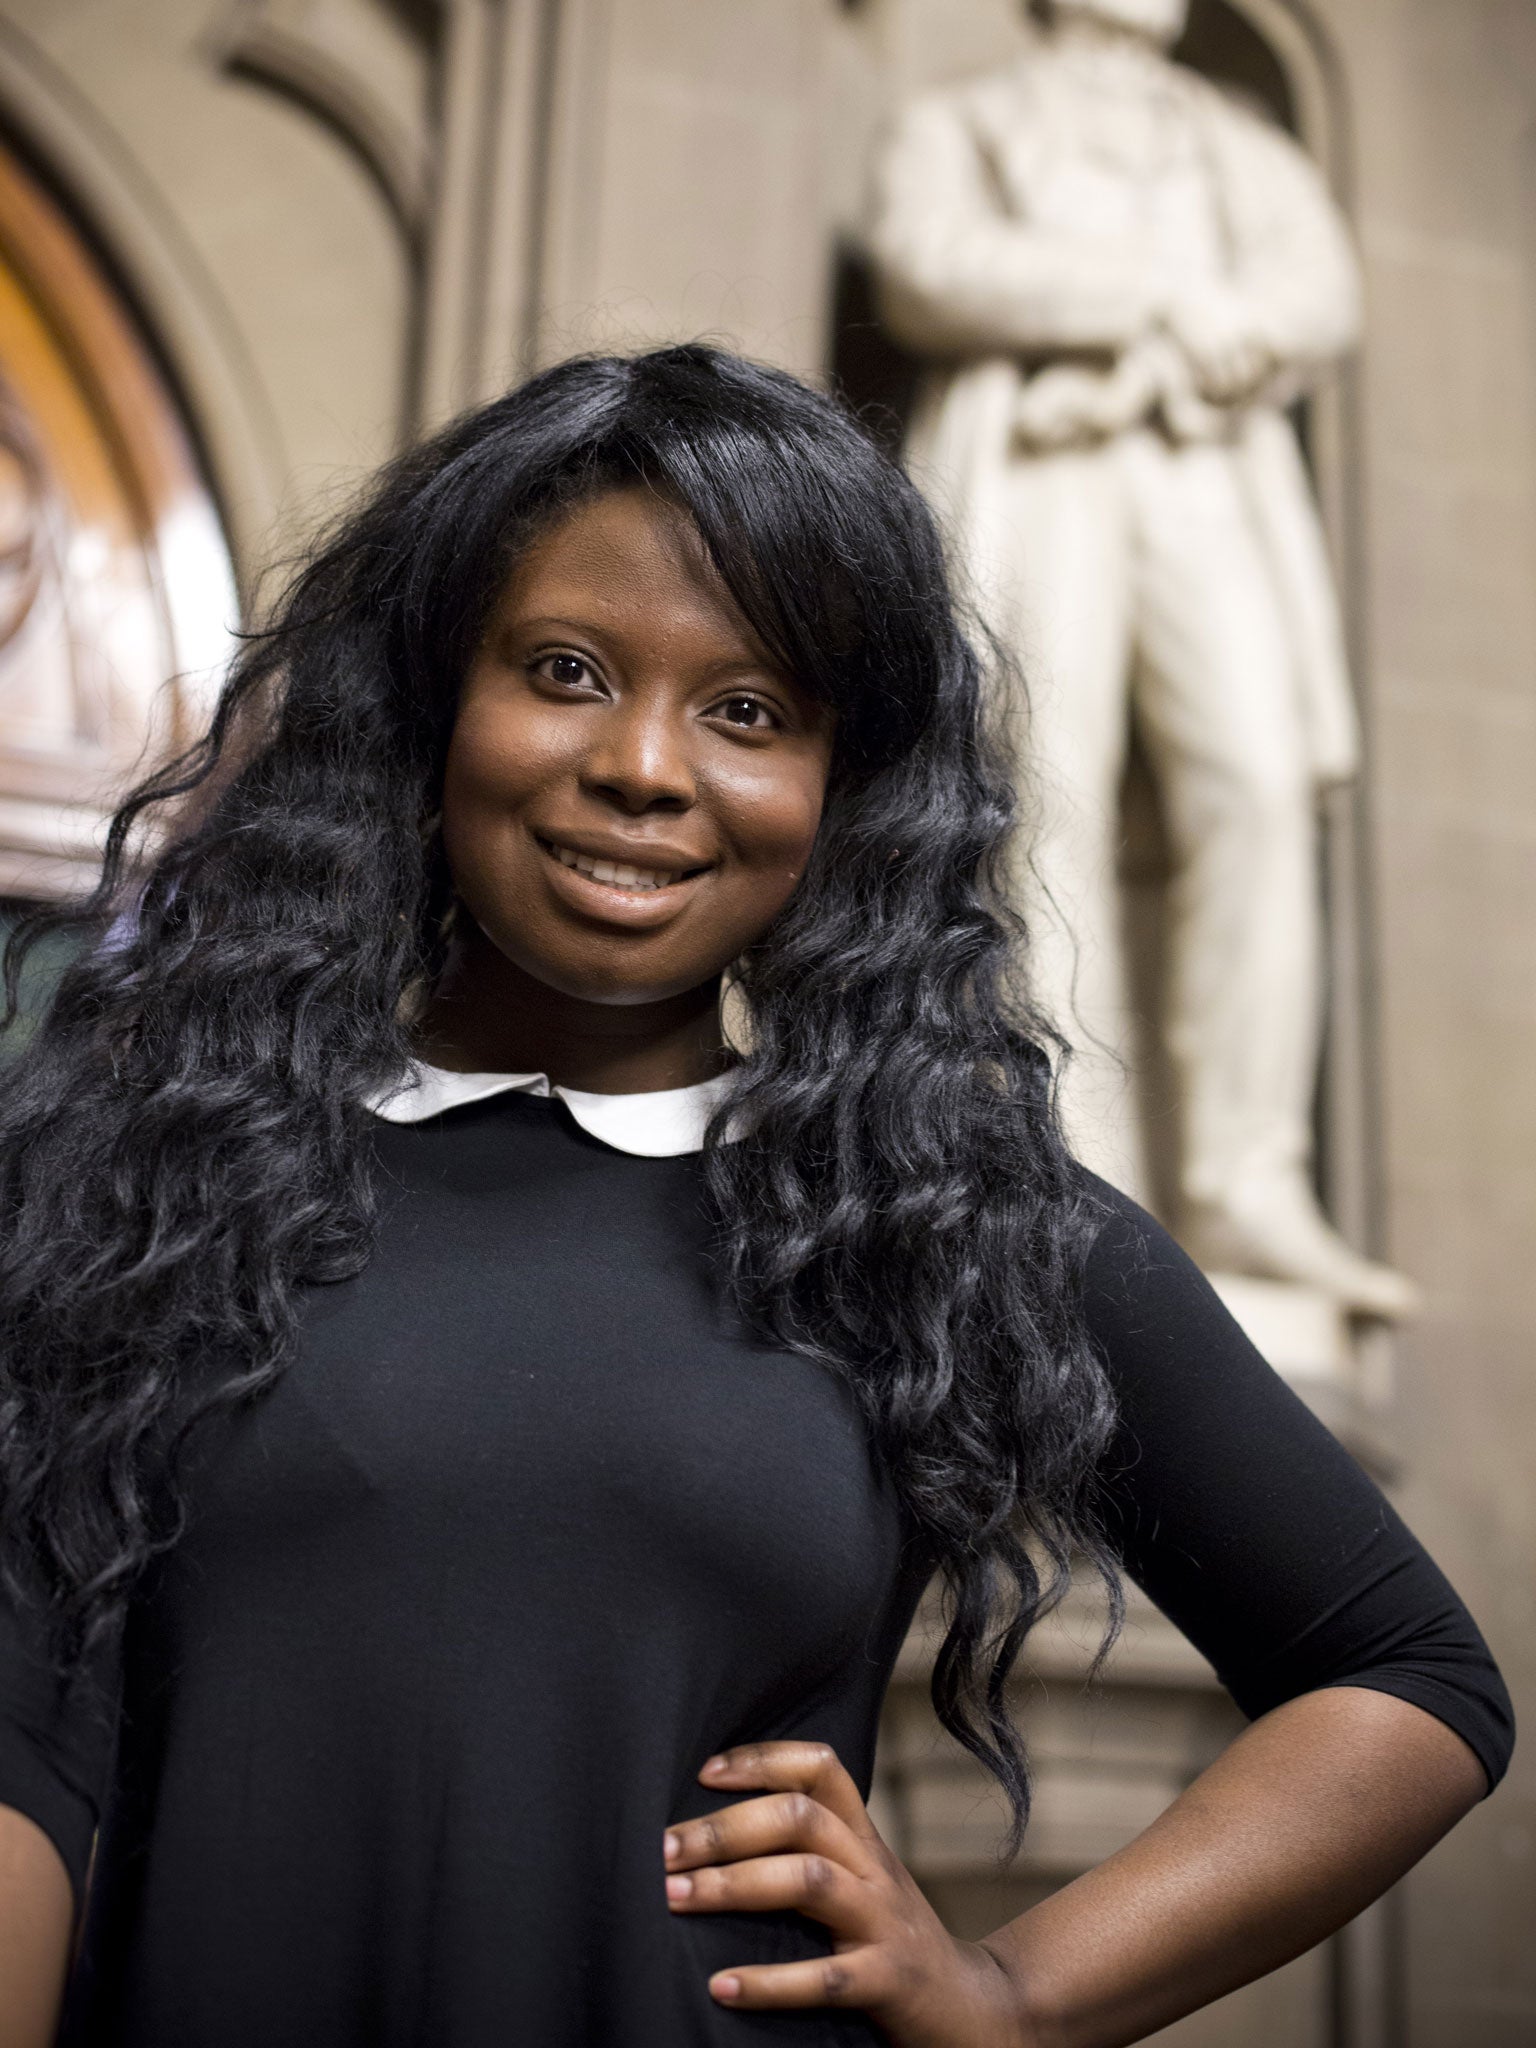 Noella Kisina, pictured at i’s debate, is planning to return to her native Democratic Republic of Congo to stand for parliament